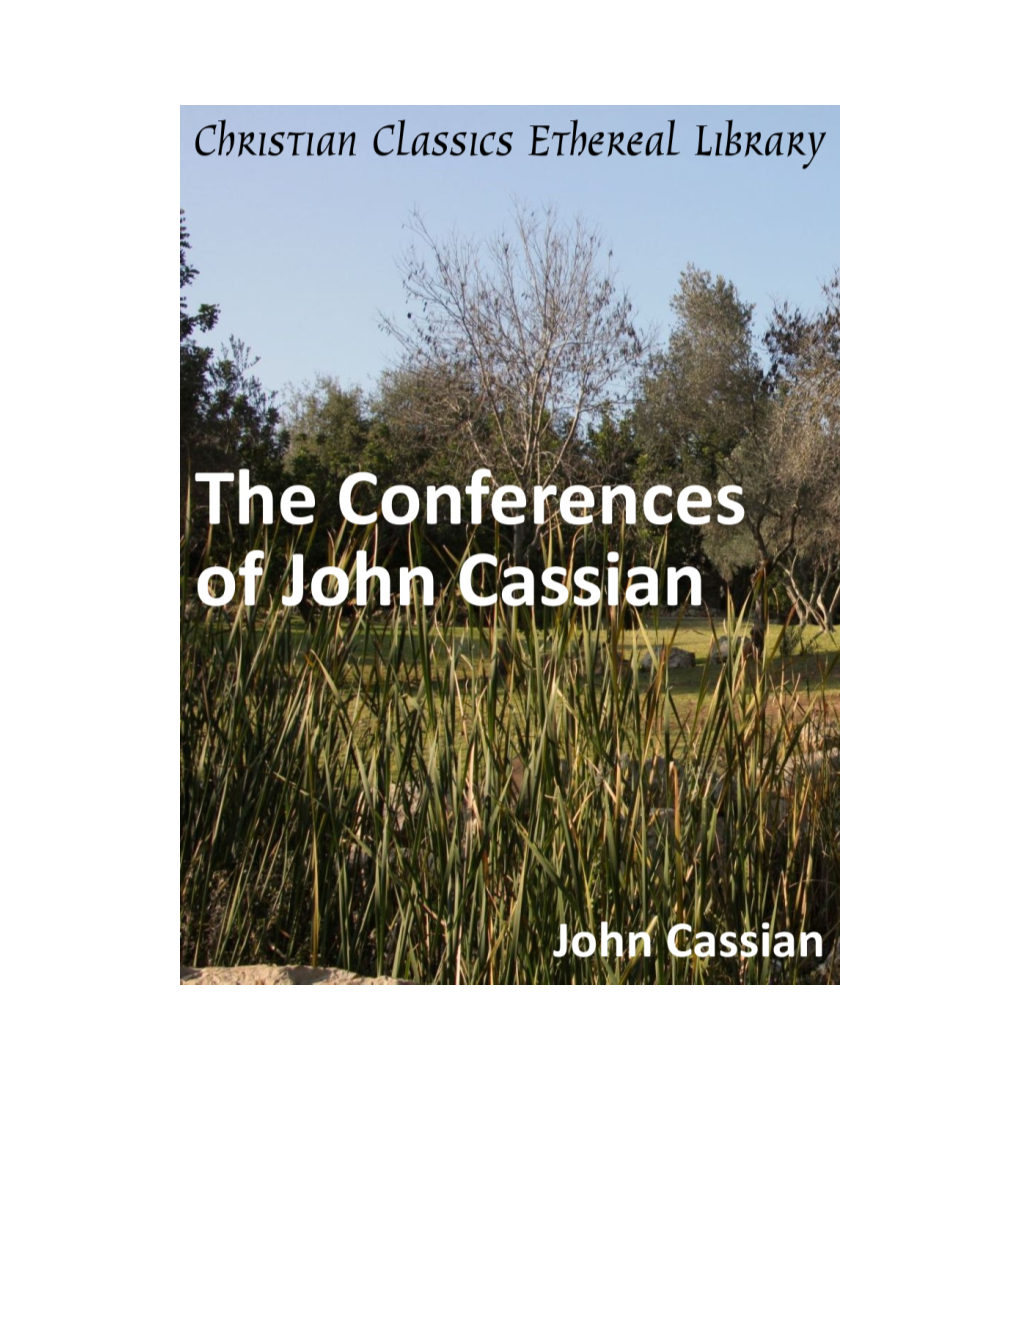 The Conferences of John Cassian